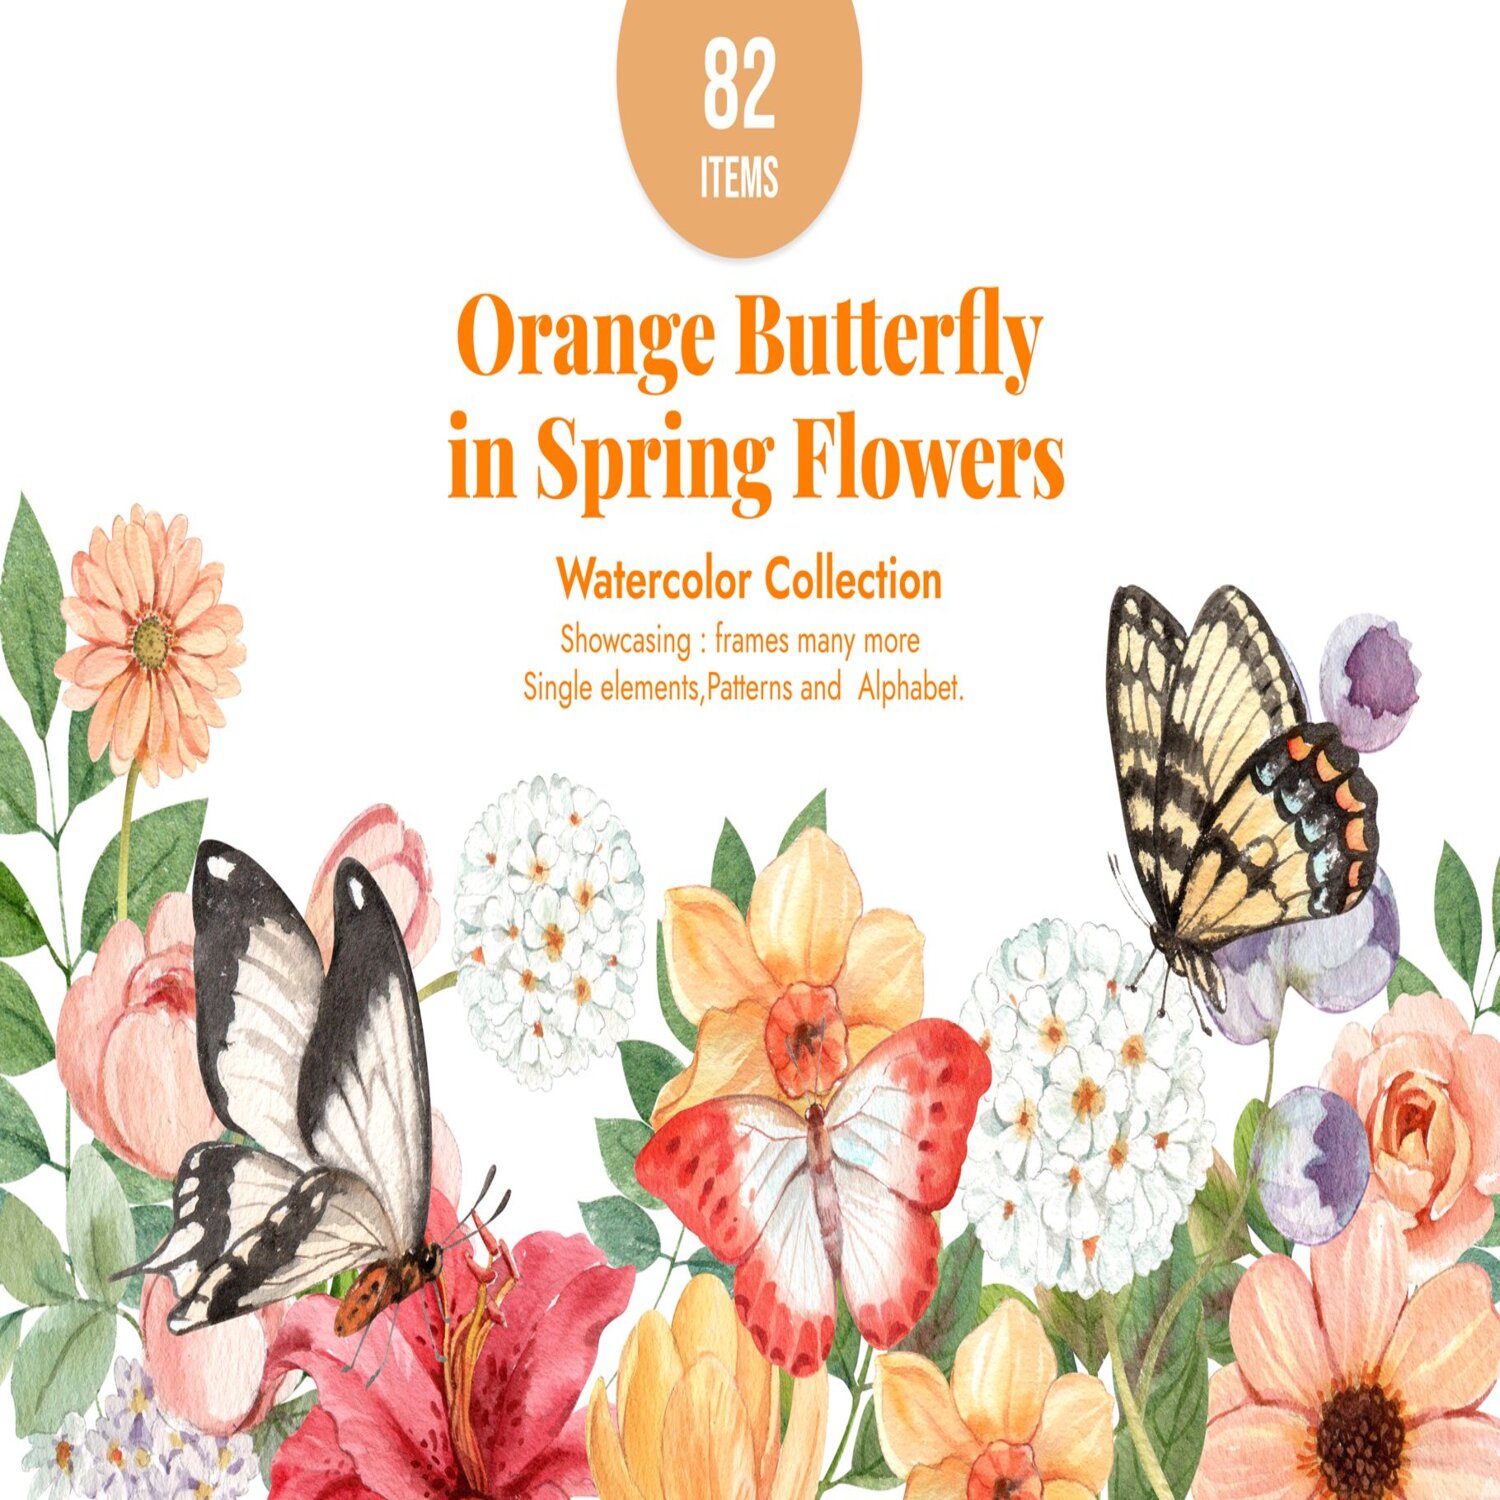 Orange Butterfly in Spring Flowers cover.